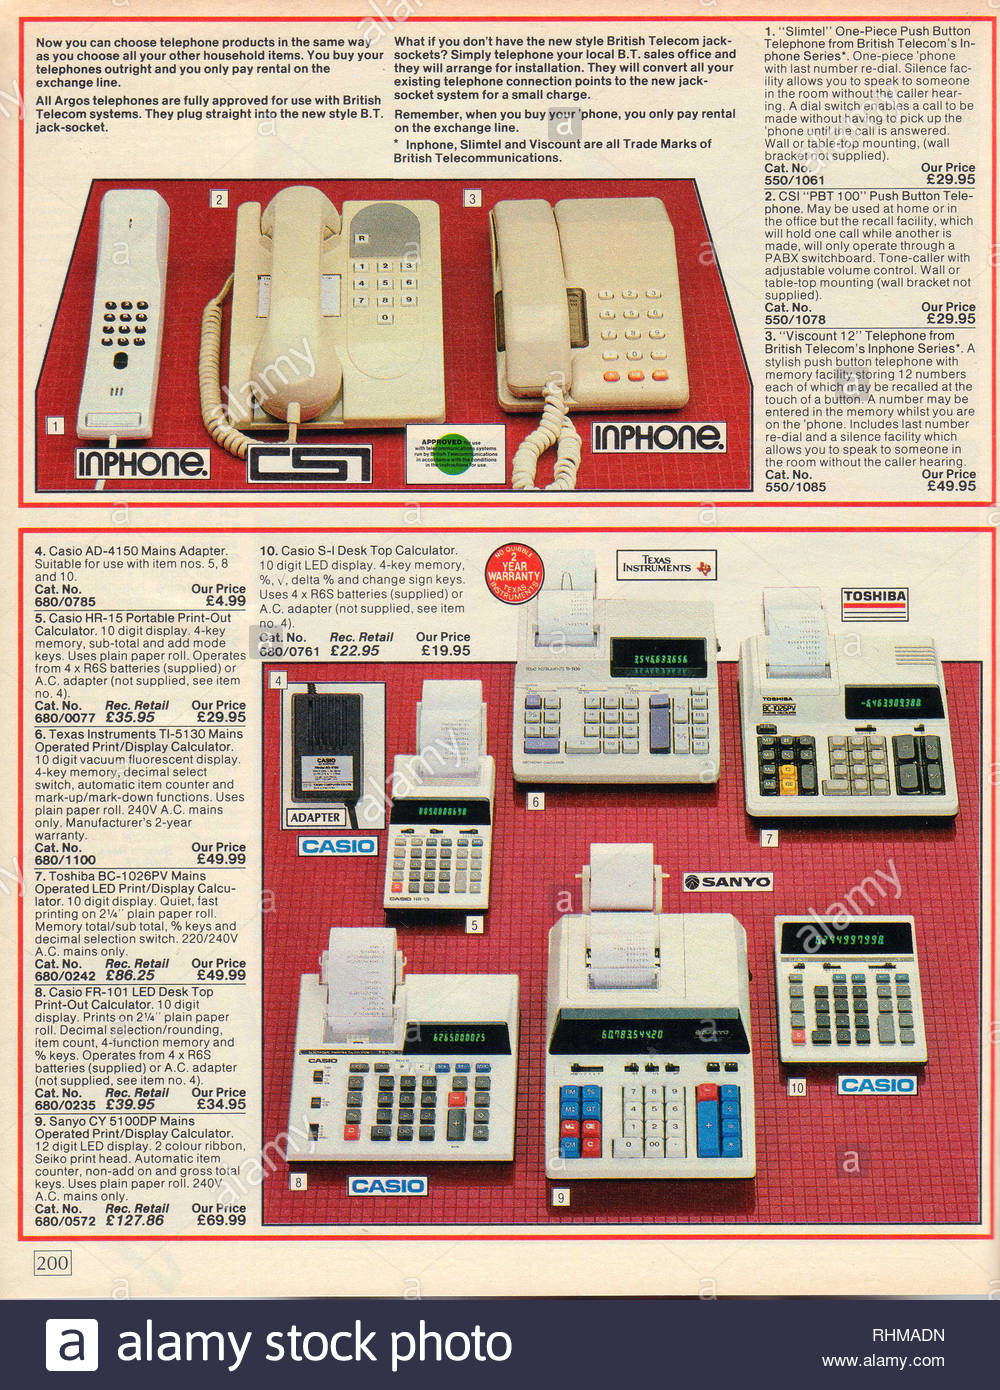 Vintage Push Button Telephone and Calculator, Argos Catalogue items from 1985 Stock Photo